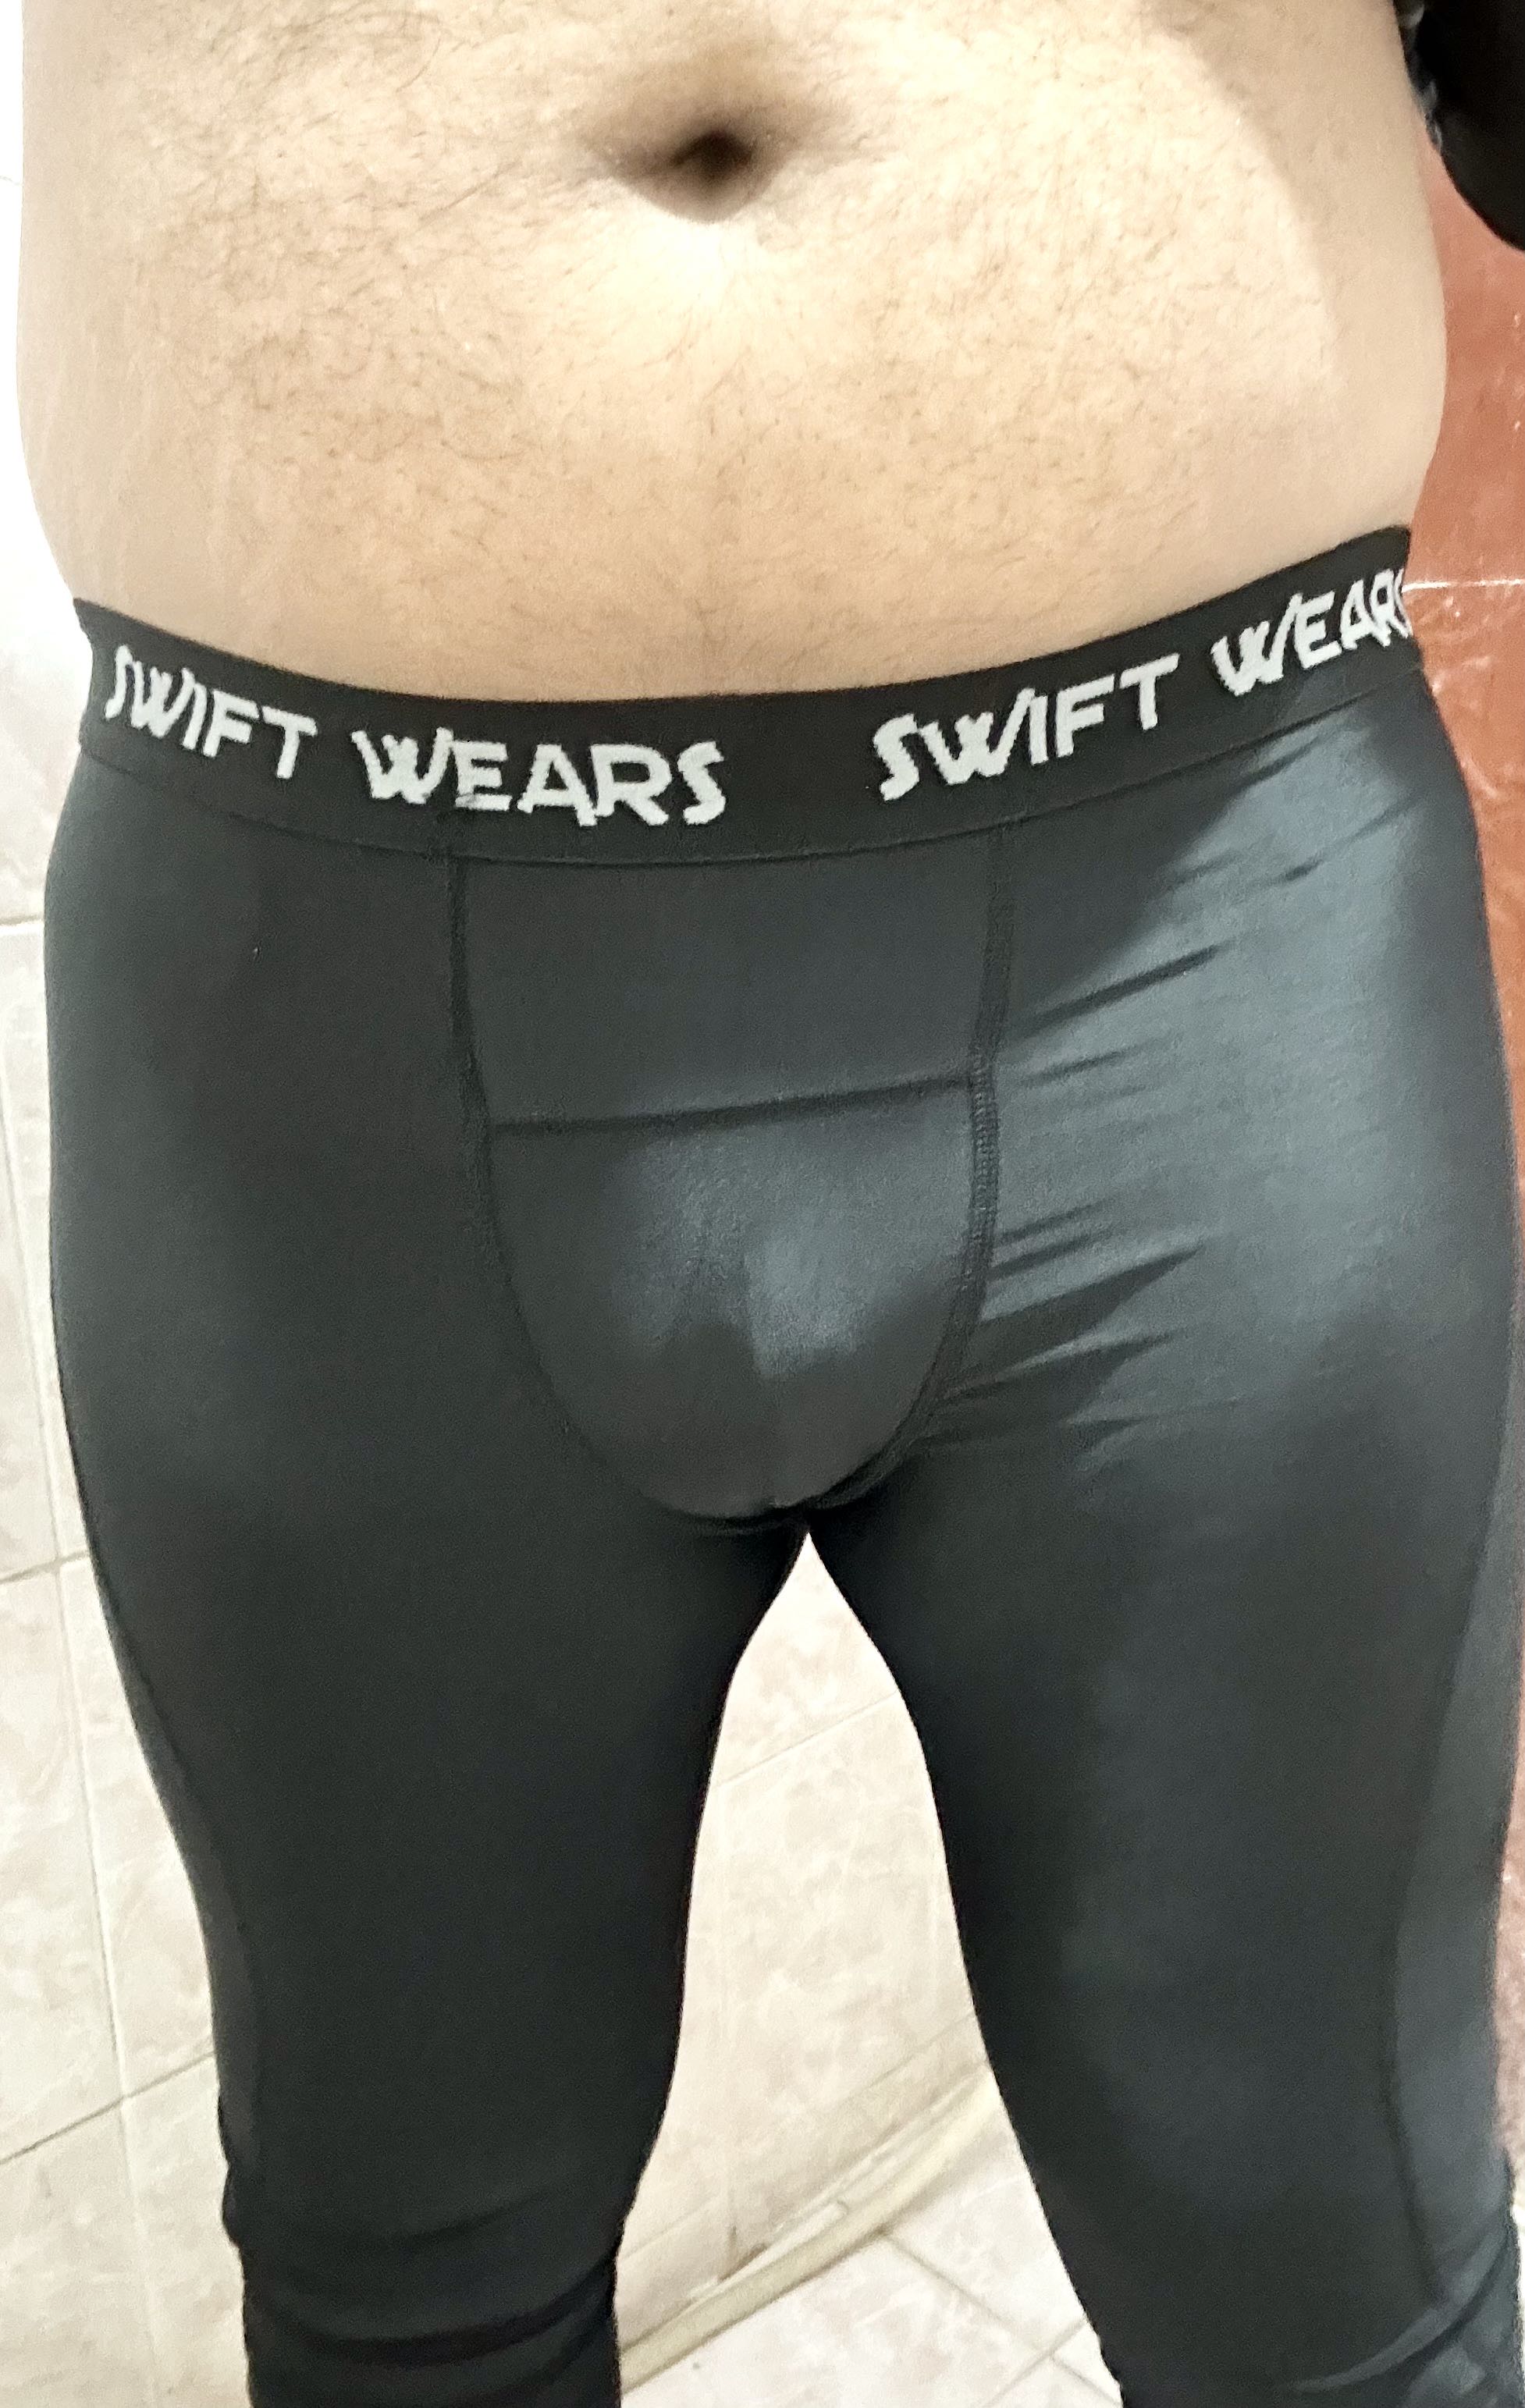 Swift Wears Men's Gym Fitness Yoga Compression Tights Wear Pant Leggings